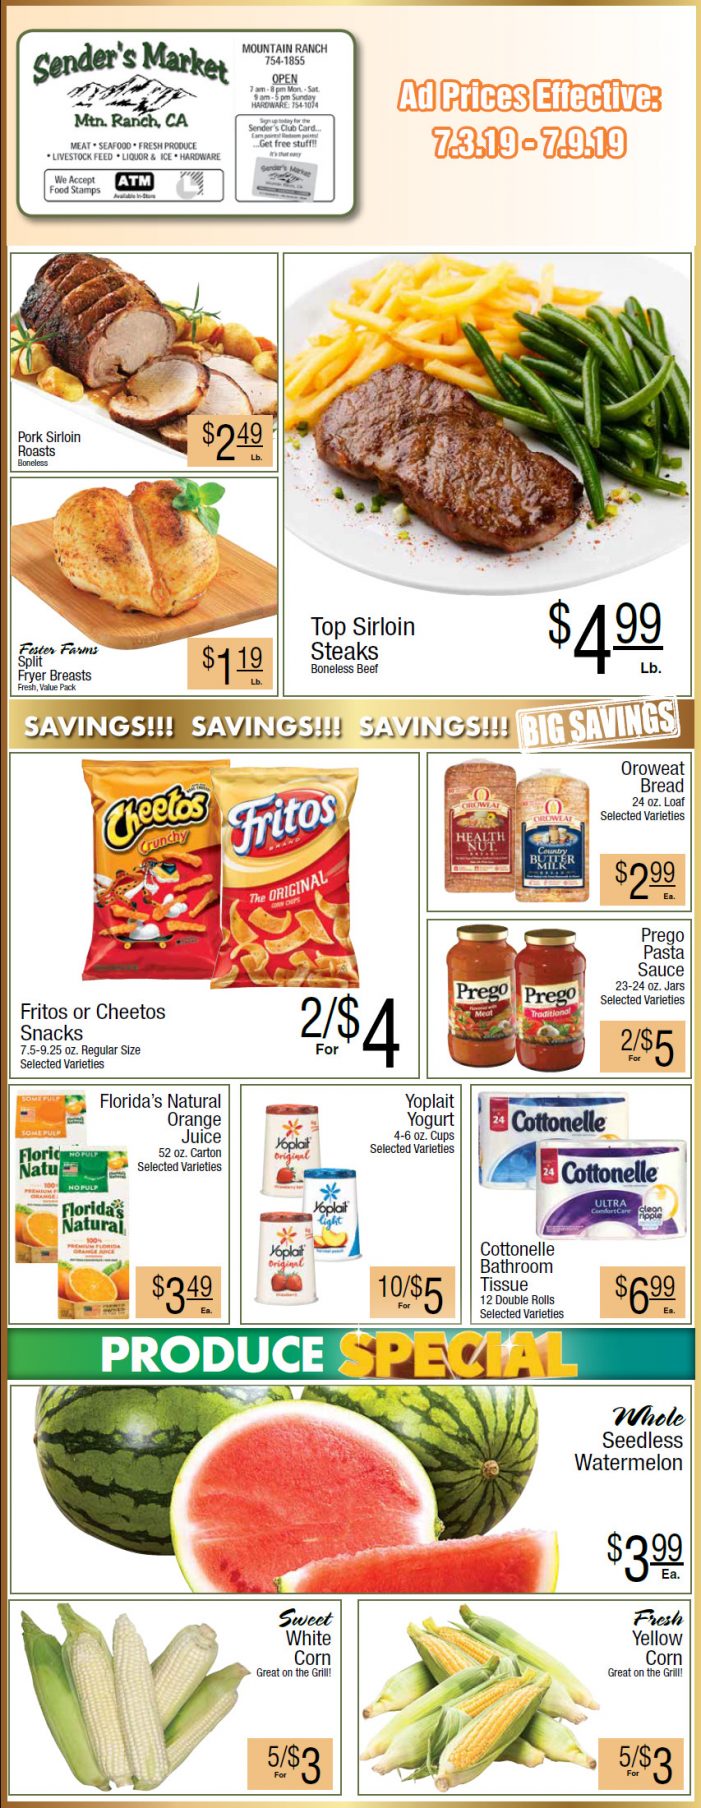 Sender’s Weekly Ad & Grocery Specials Through July 9th